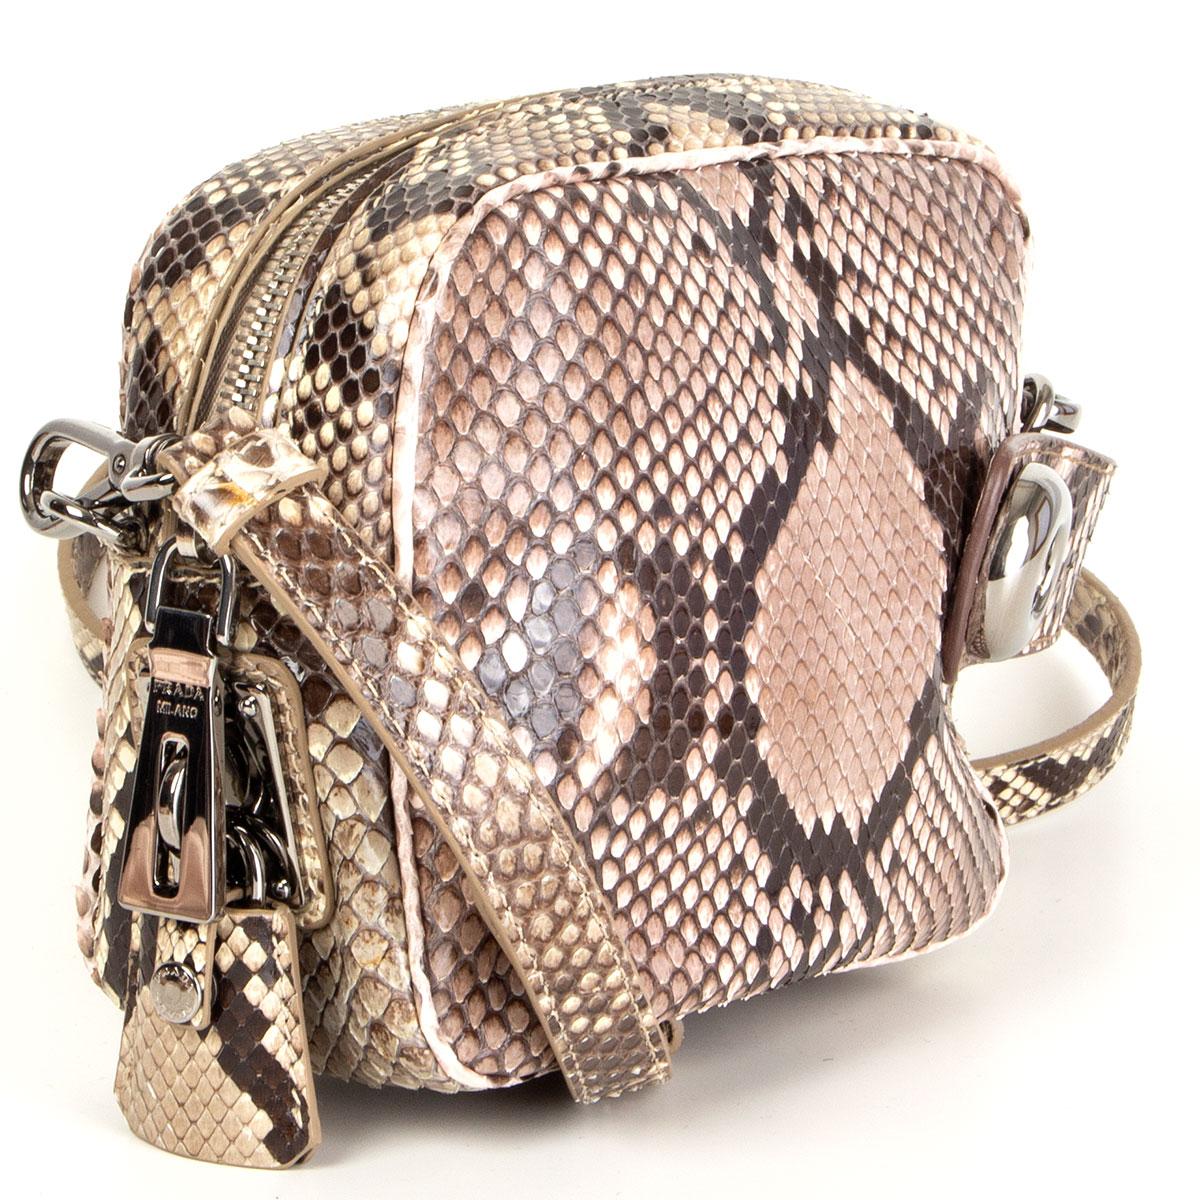 Prada crossbody bag in Cipria/Rocci (beige-taupe, rose-taupe and espresso brown) python from the Fall 2011 runway. Opens with a zipper on top and is lined in nude soft lambskin with two open pockets. Has a detachable and adjustable shoulder strap